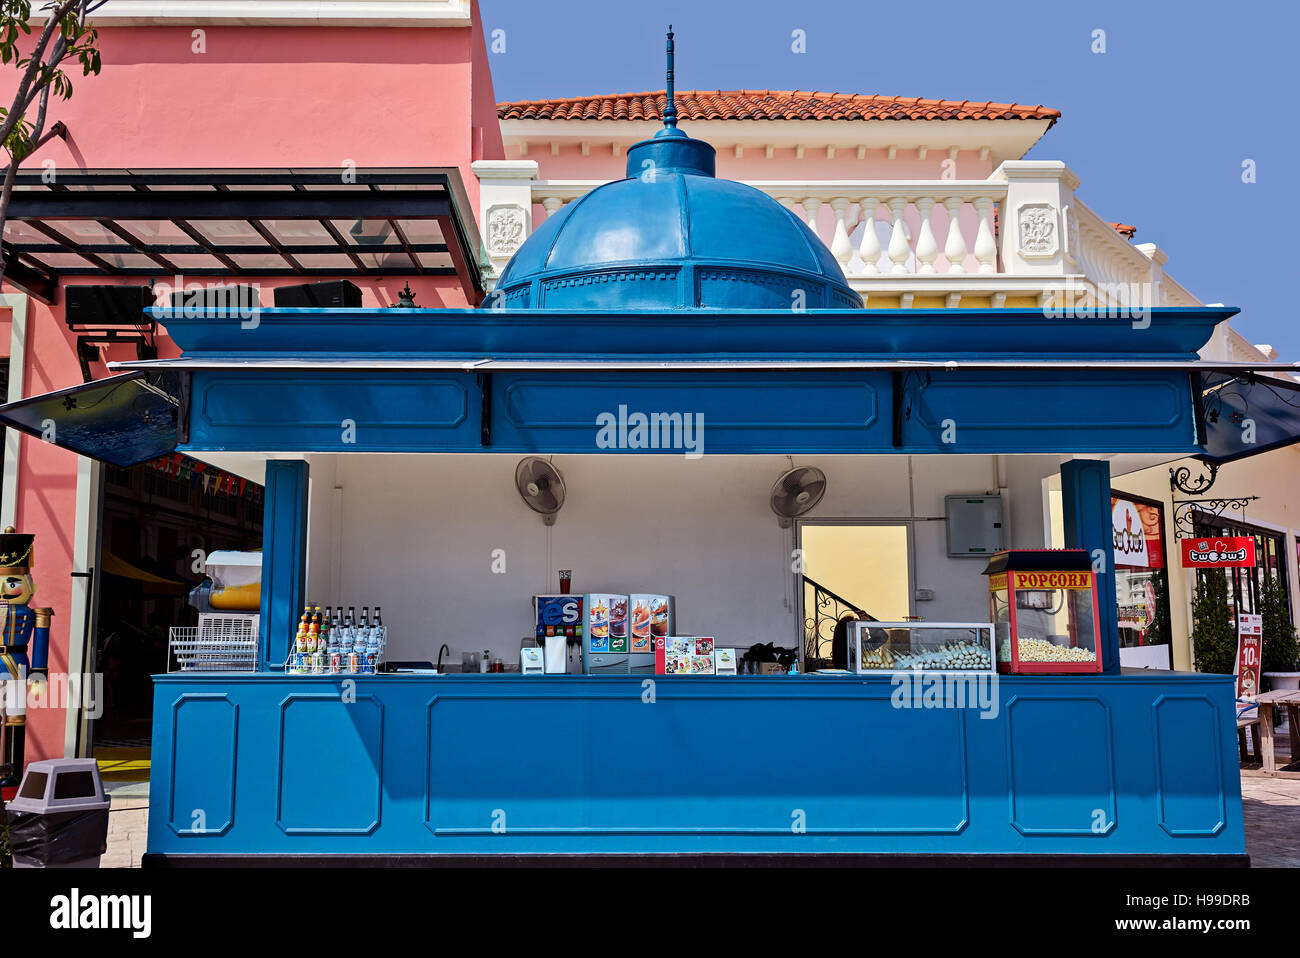 Kiosk. Newly constructed refreshment kiosk in bright blue paint. Stock Photo